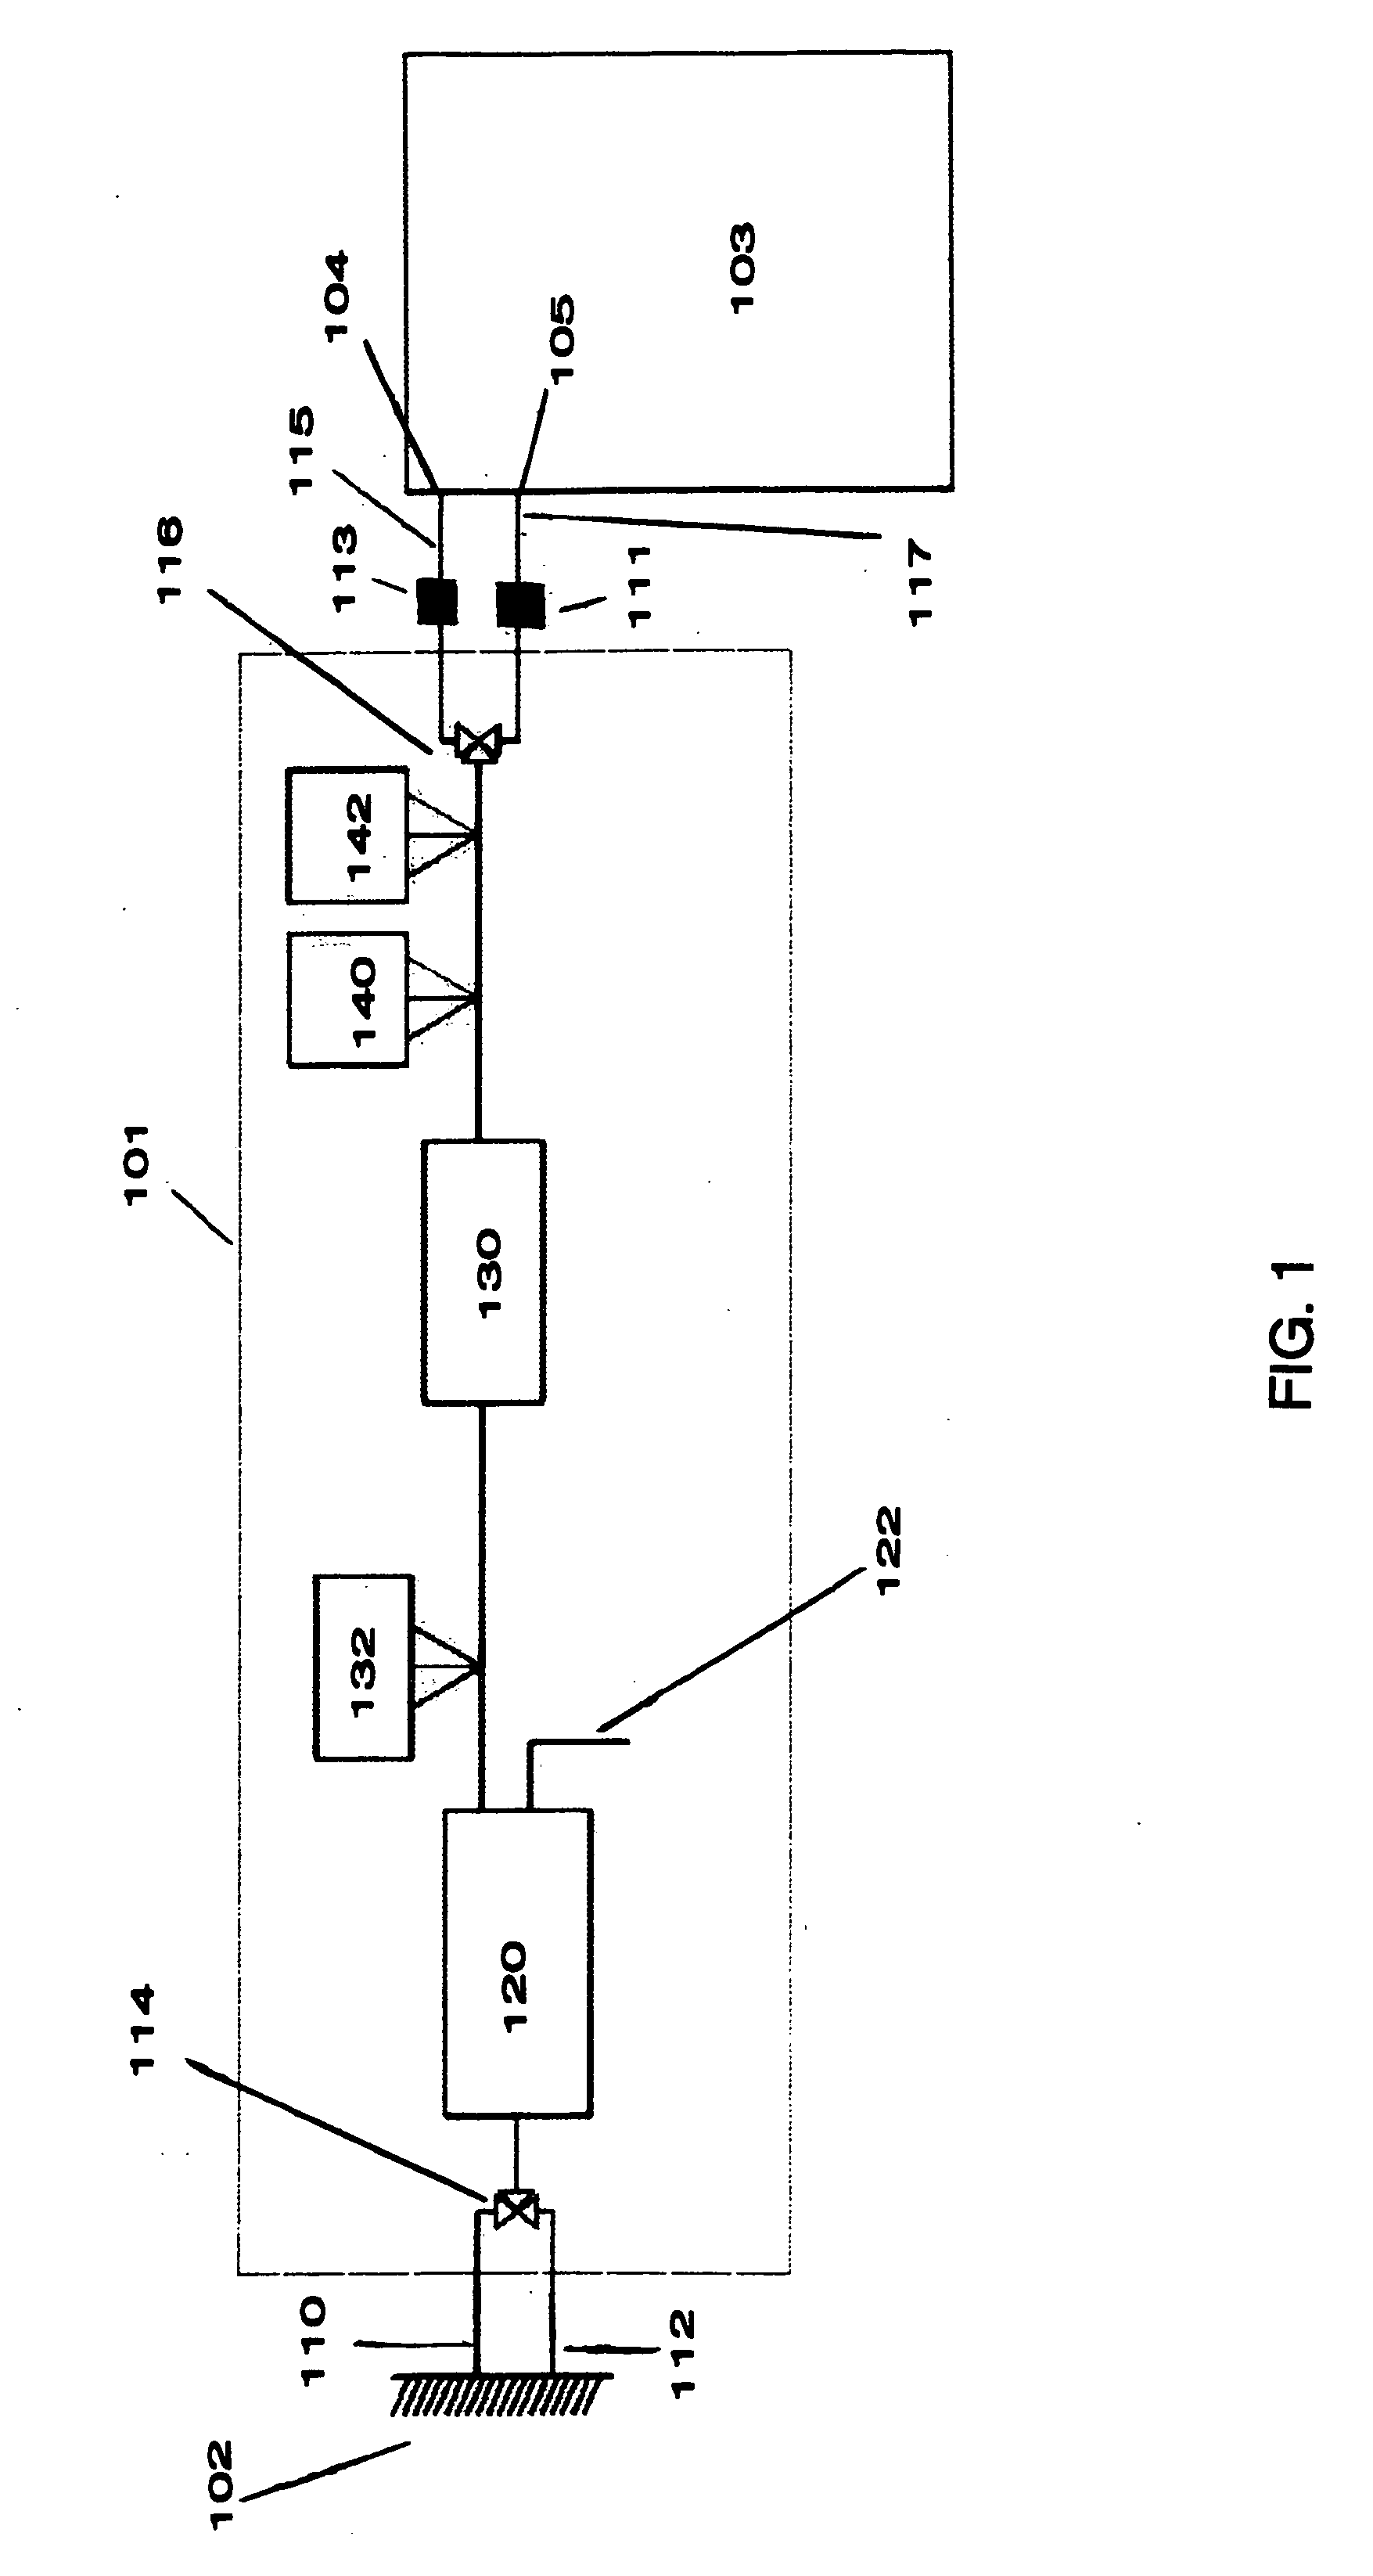 Device and system for improved cleaning in a washing machine